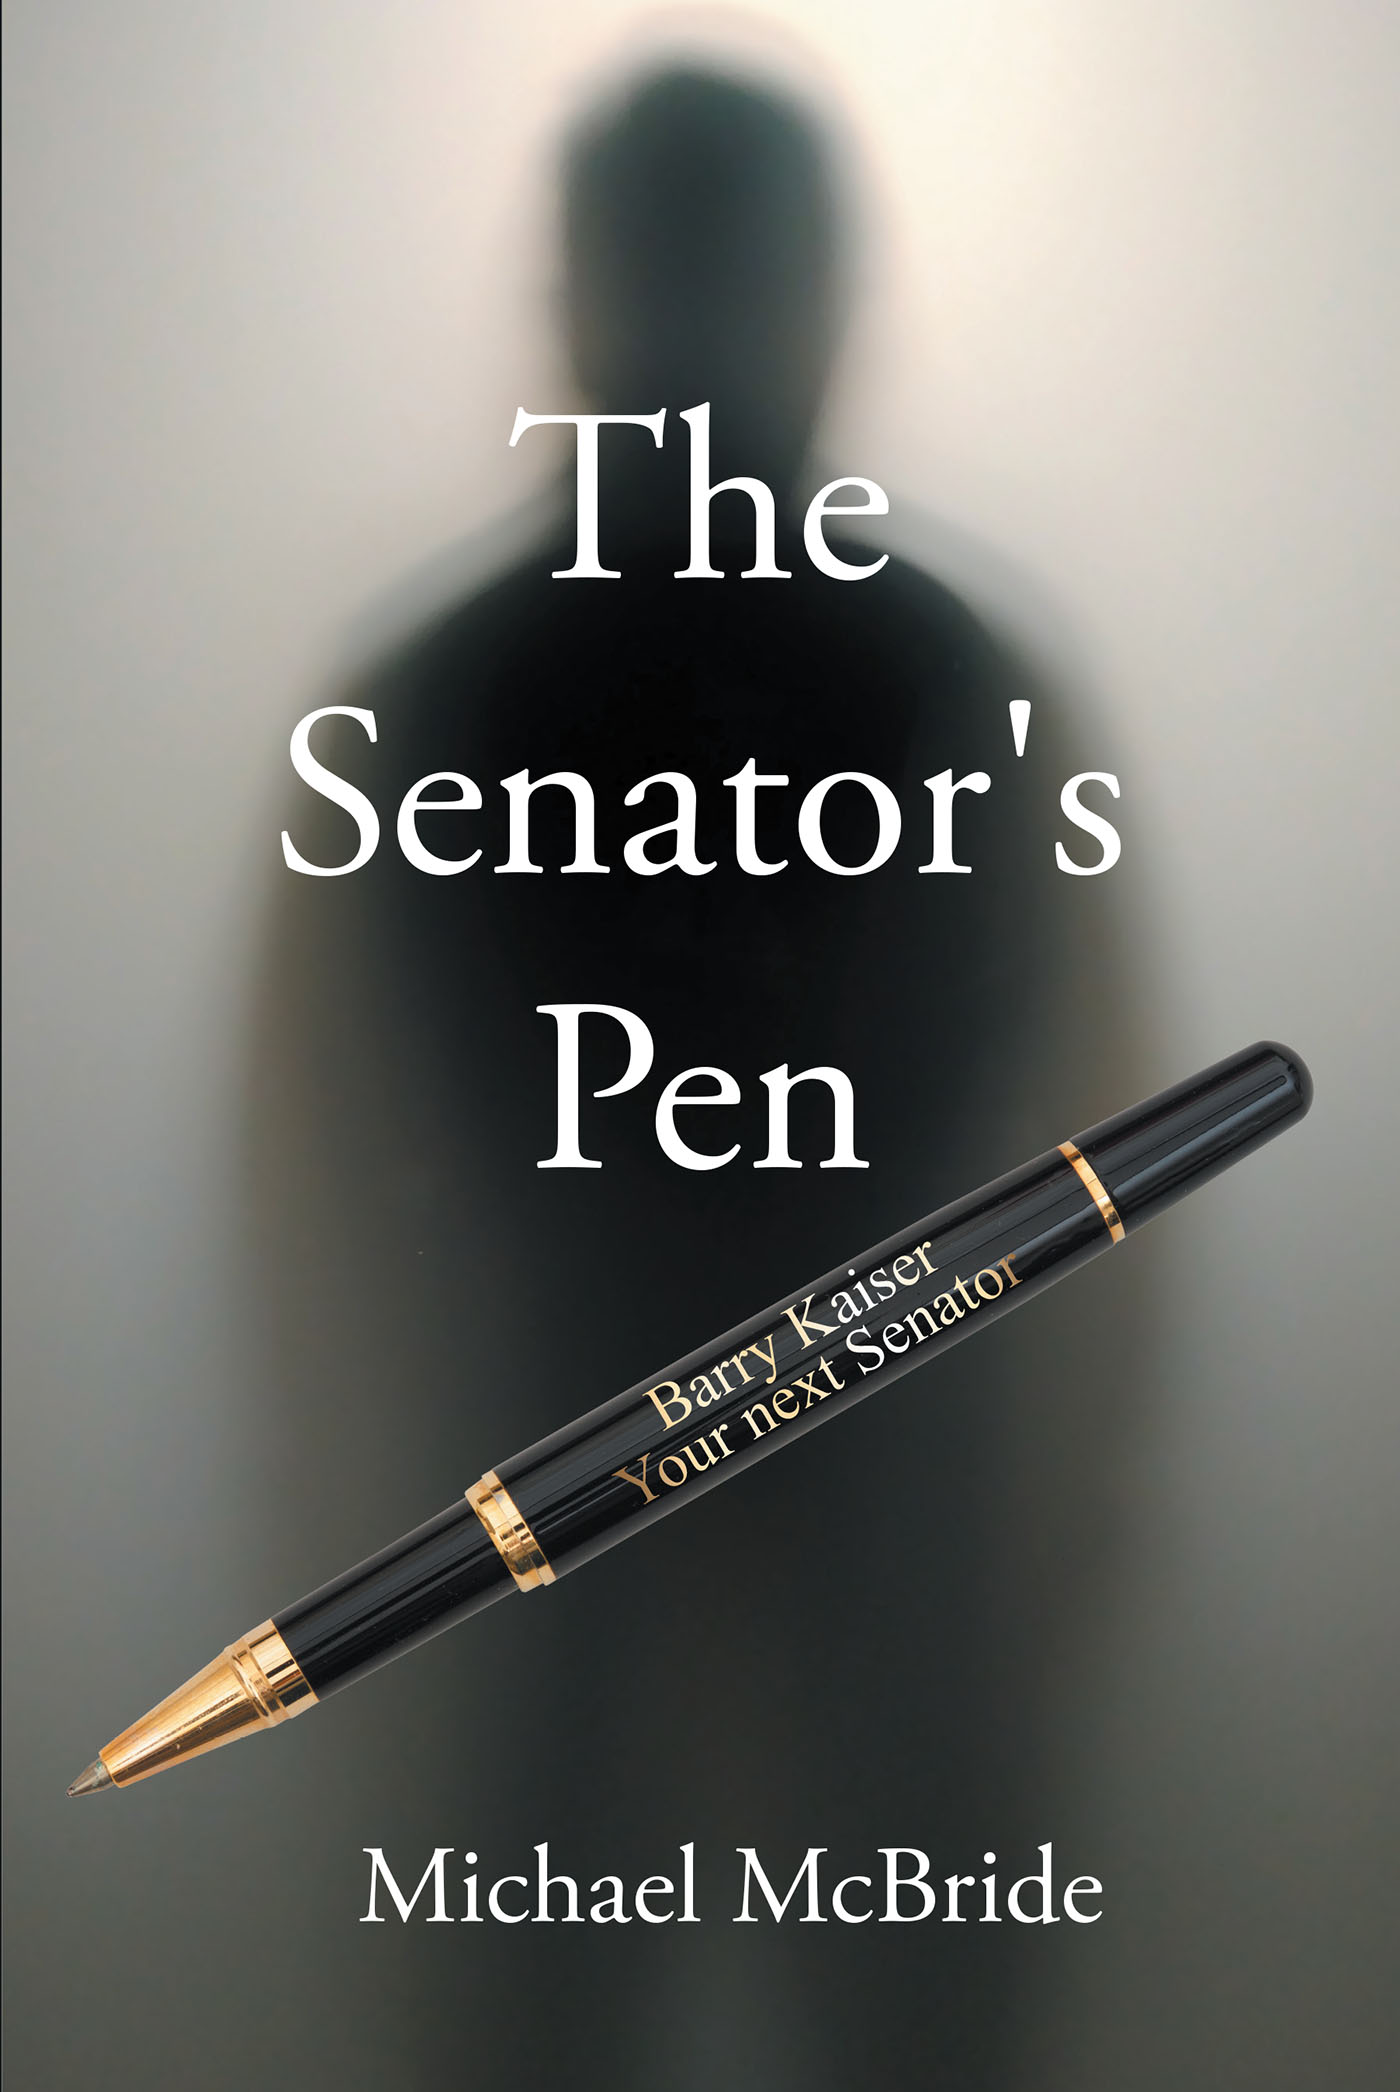 Author Michael McBride’s New Book, “The Senator's Pen,” Follows a Retired Marshal Who Re-Opens His Final Murder Case, Only to be Drawn Into a Dangerous World of Crime